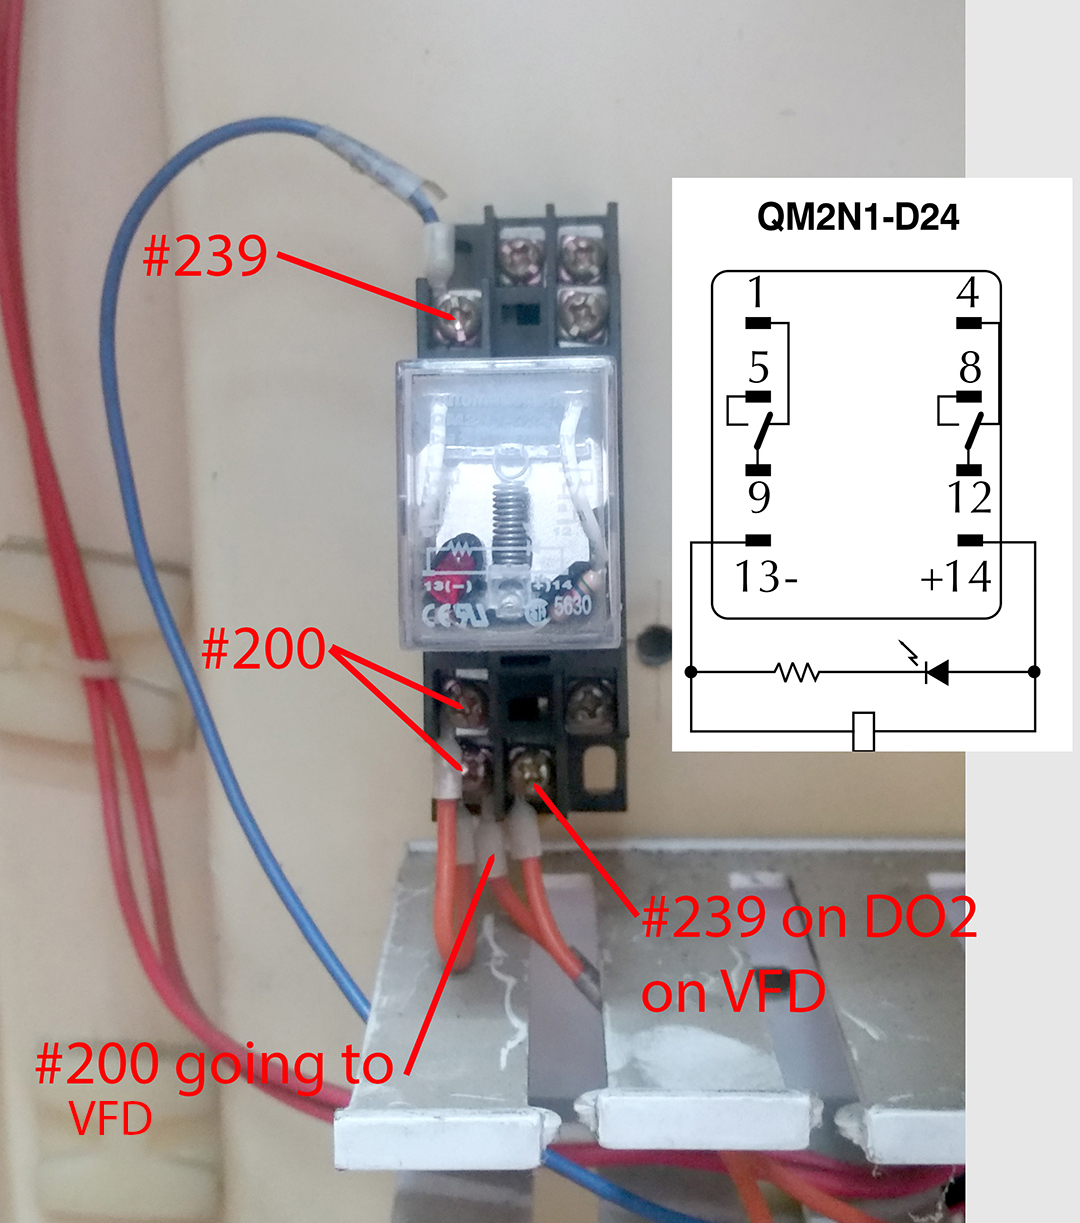 Specs of Relay QM2N1-D24 used on VFD